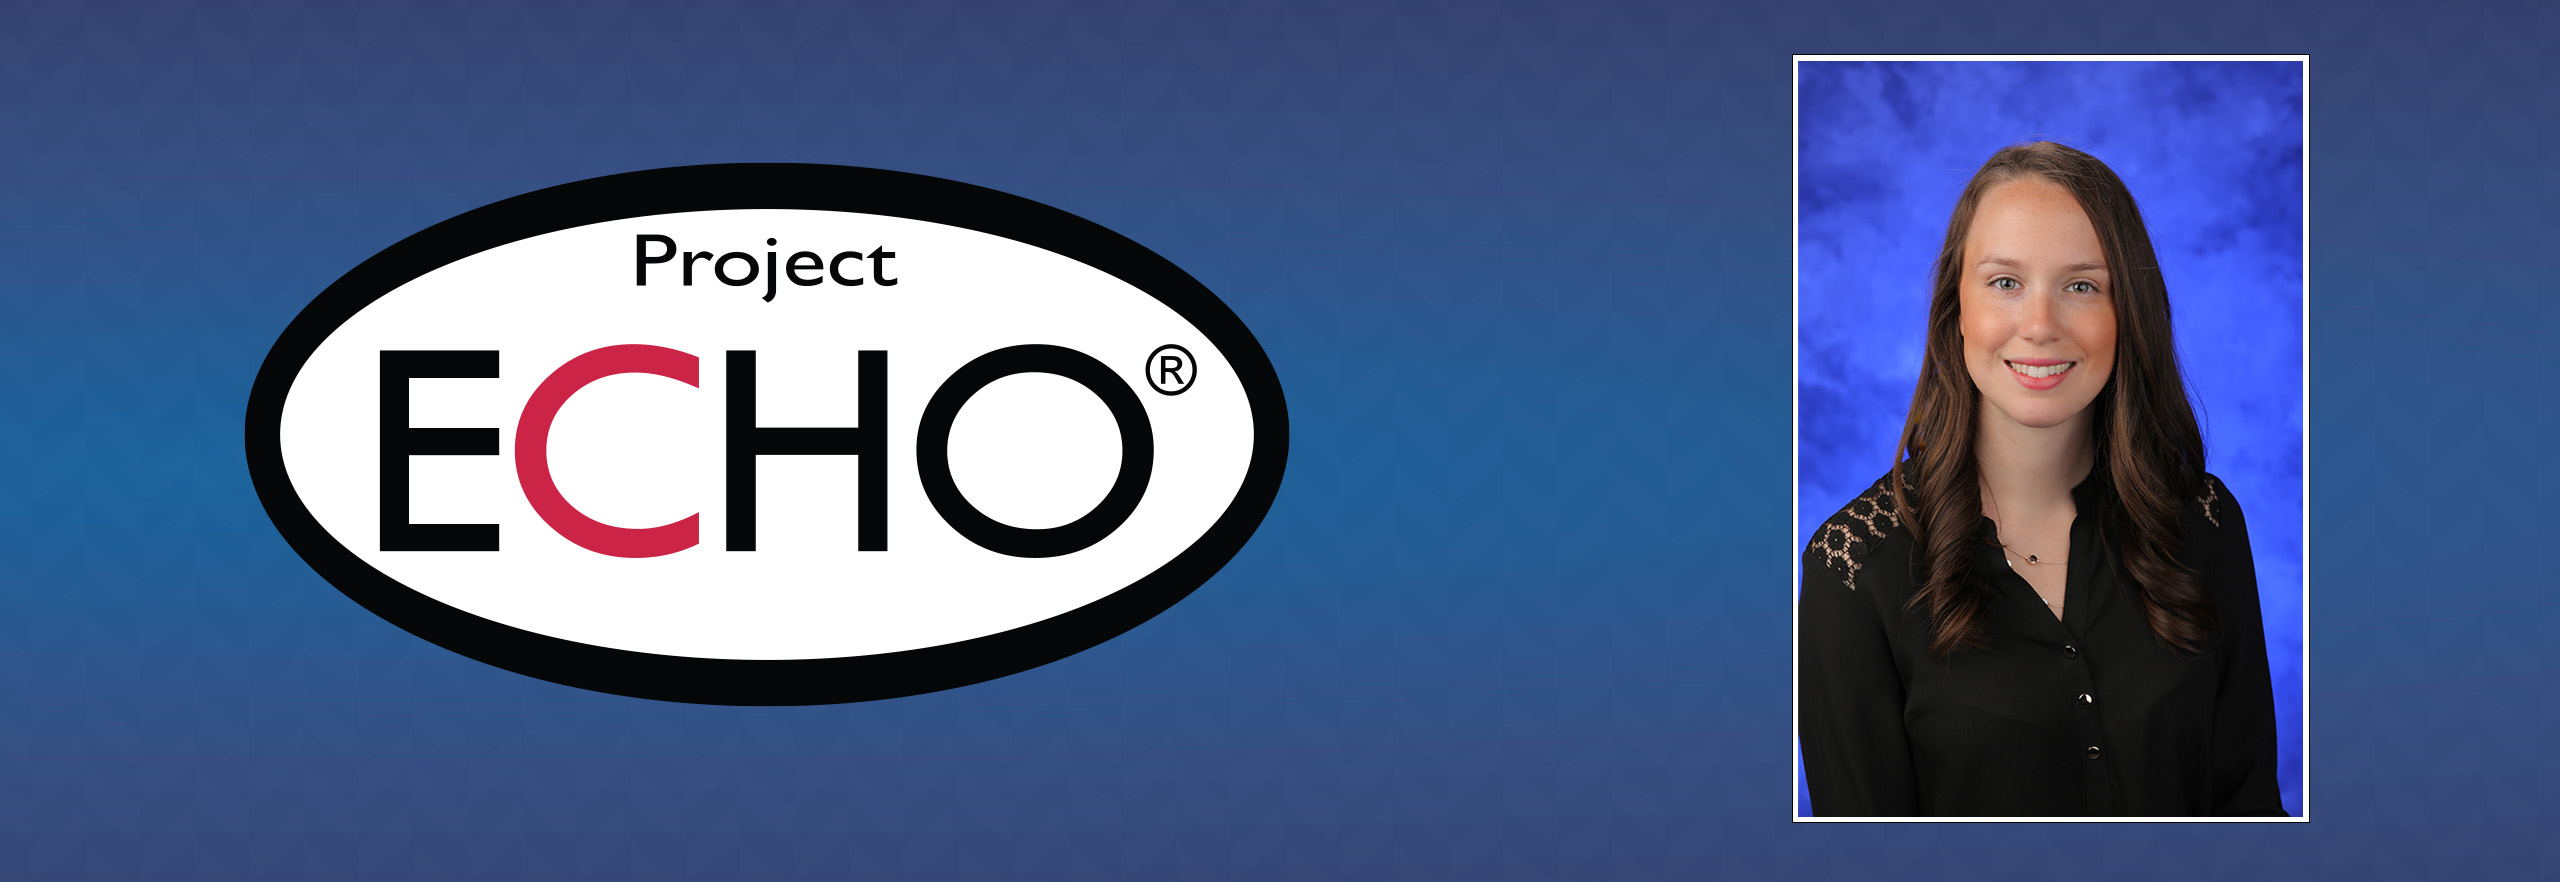 Project ECHO logo with a professional portrait of Kara Bowers